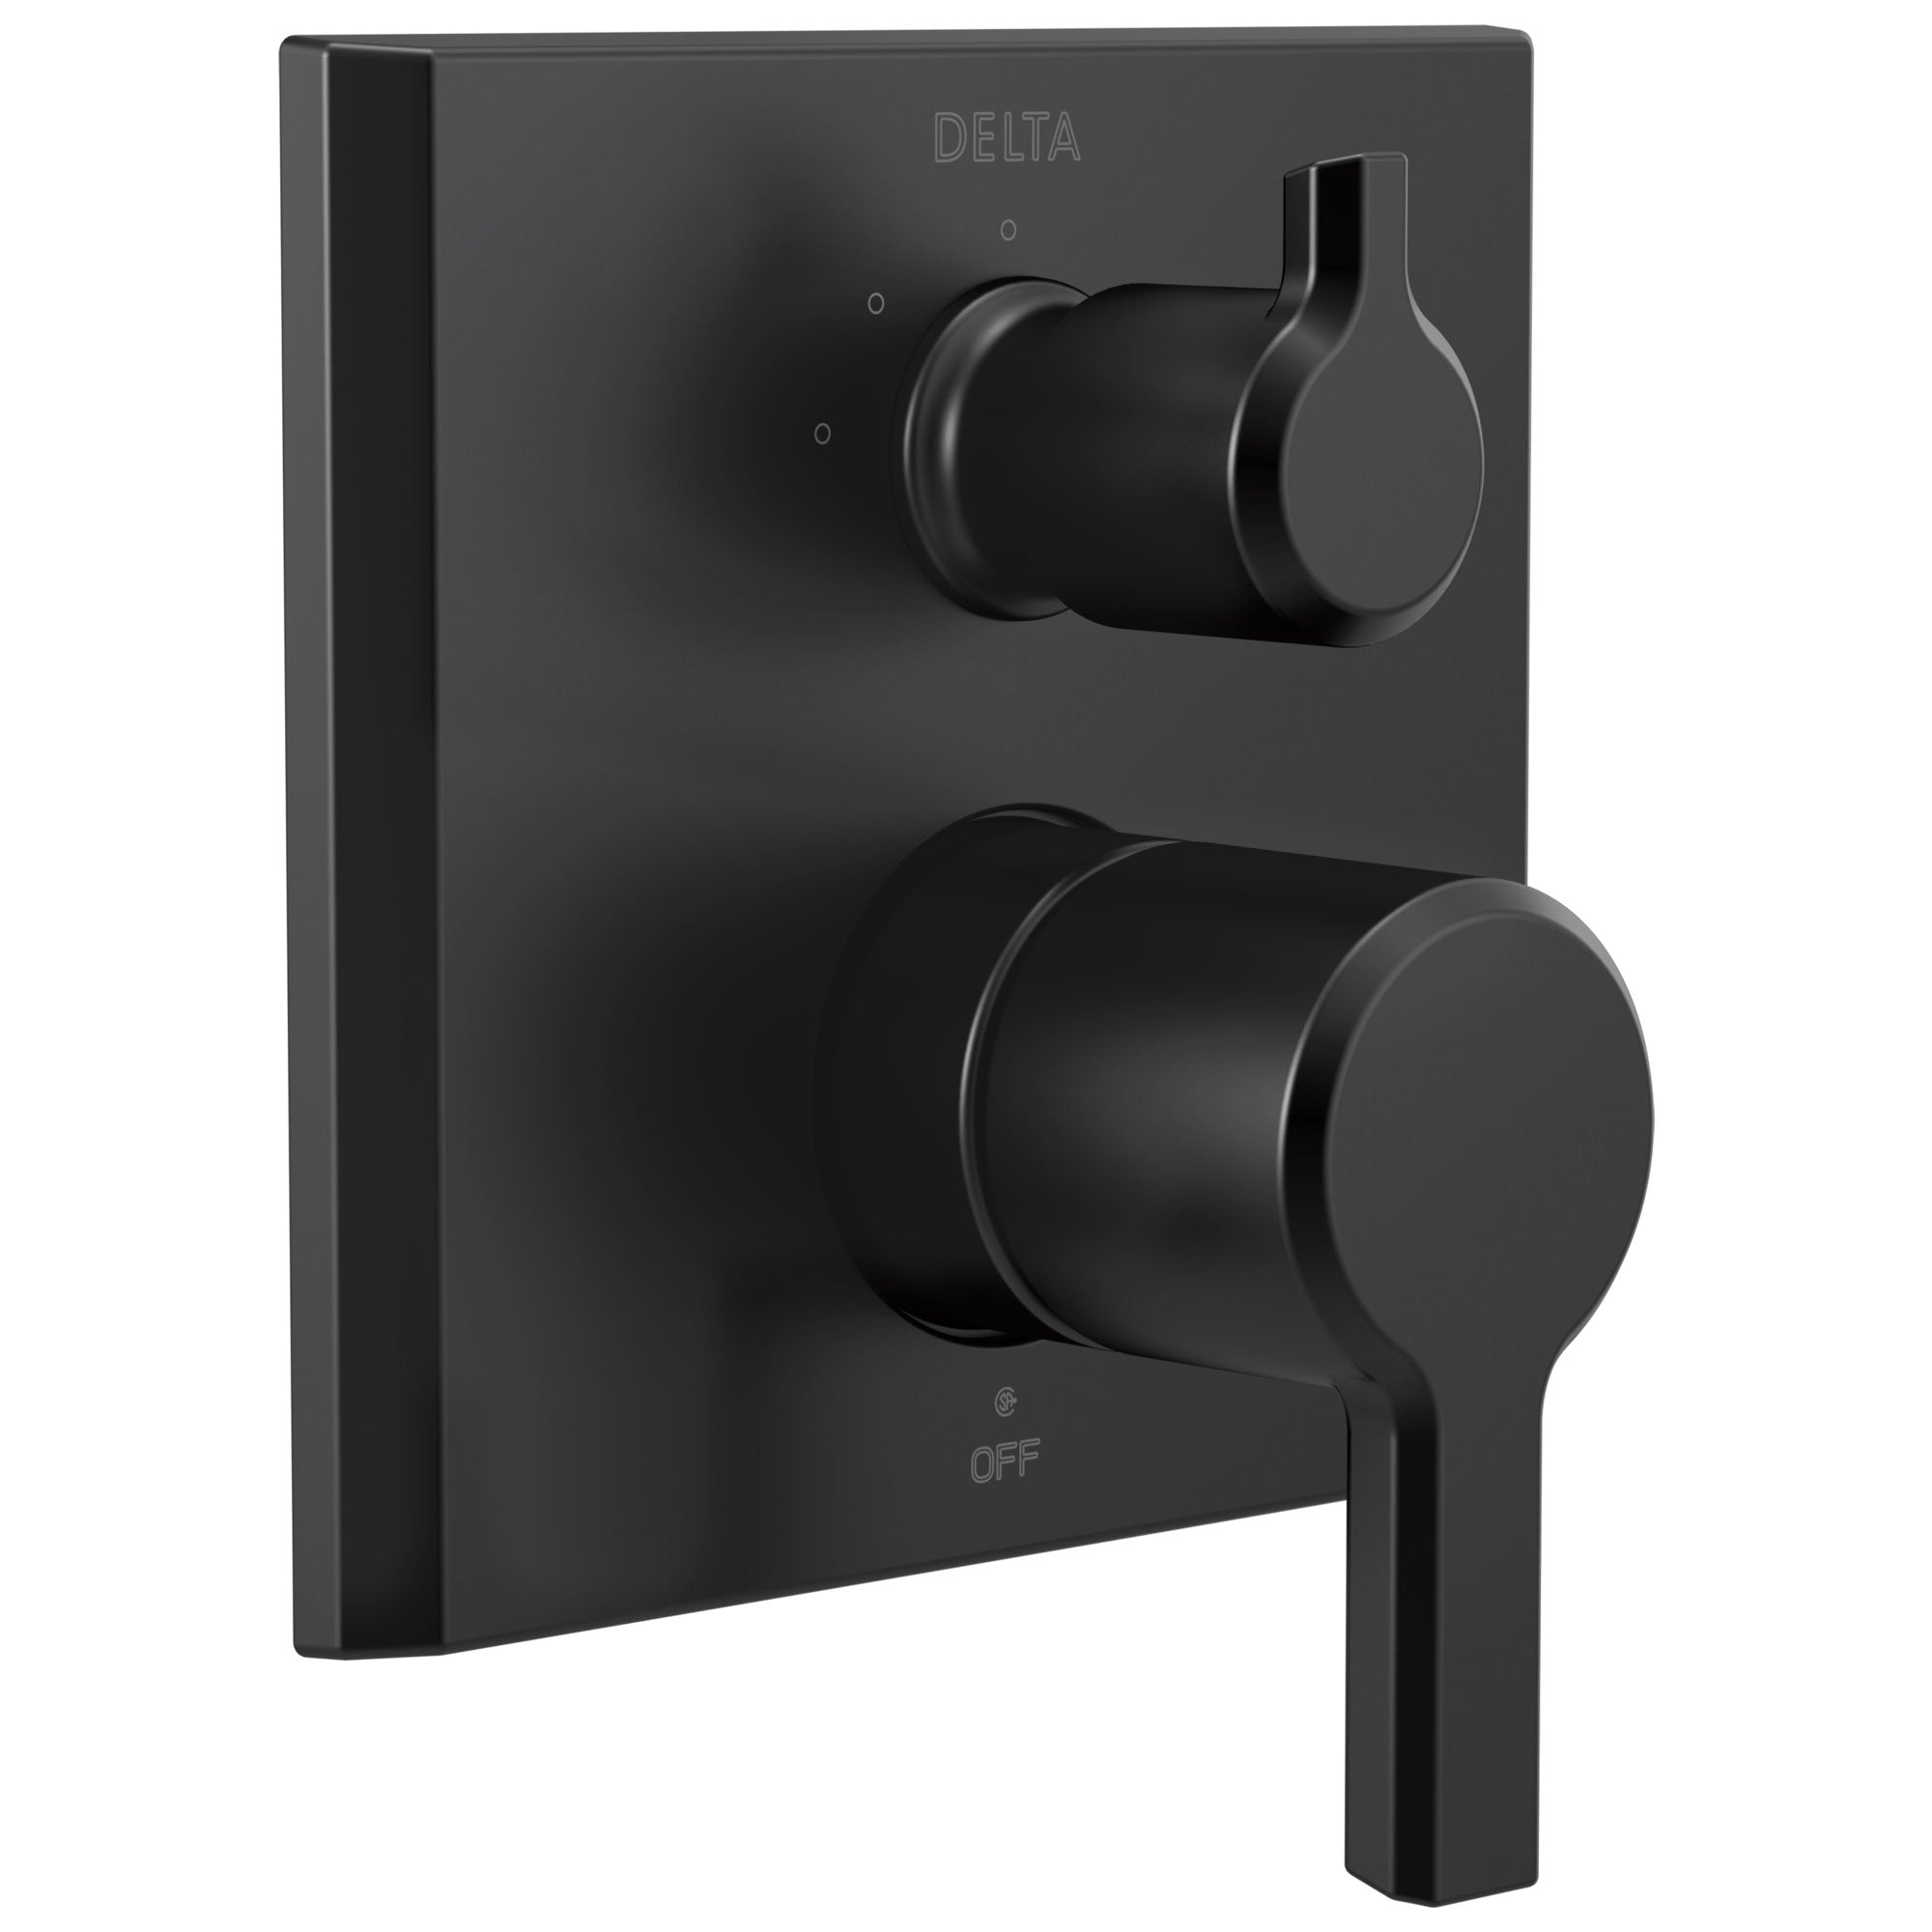 Delta Pivotal Matte Black Finish 14 Series Shower Faucet System Control with 3-Setting Integrated Diverter Includes Valve and Handles D3190V